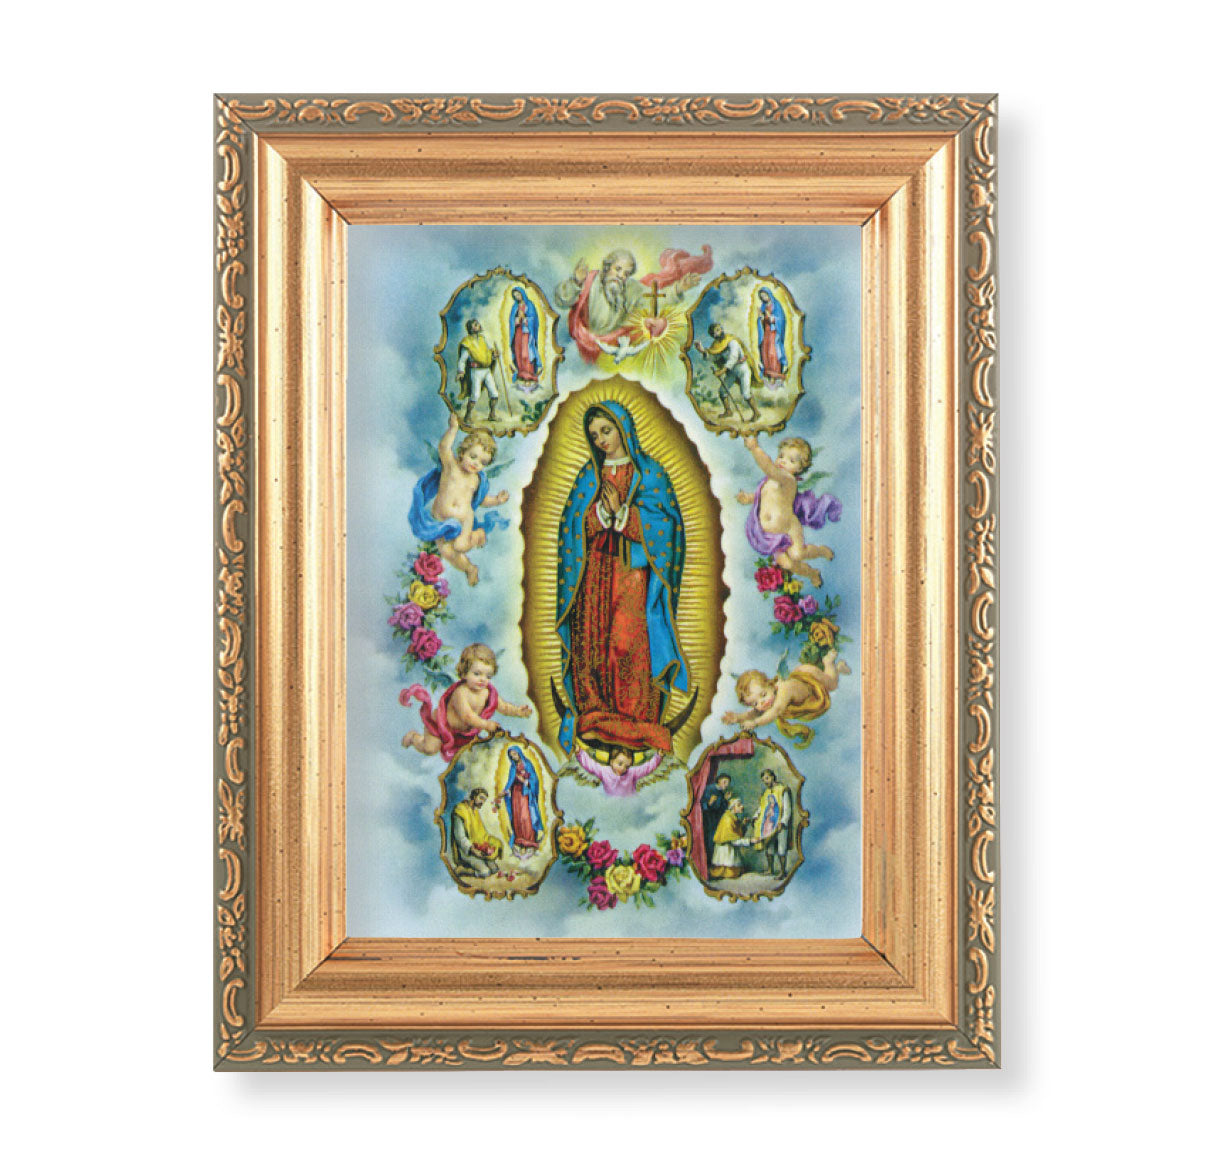 Our Lady of Guadalupe with Visions Antique Gold Framed Art